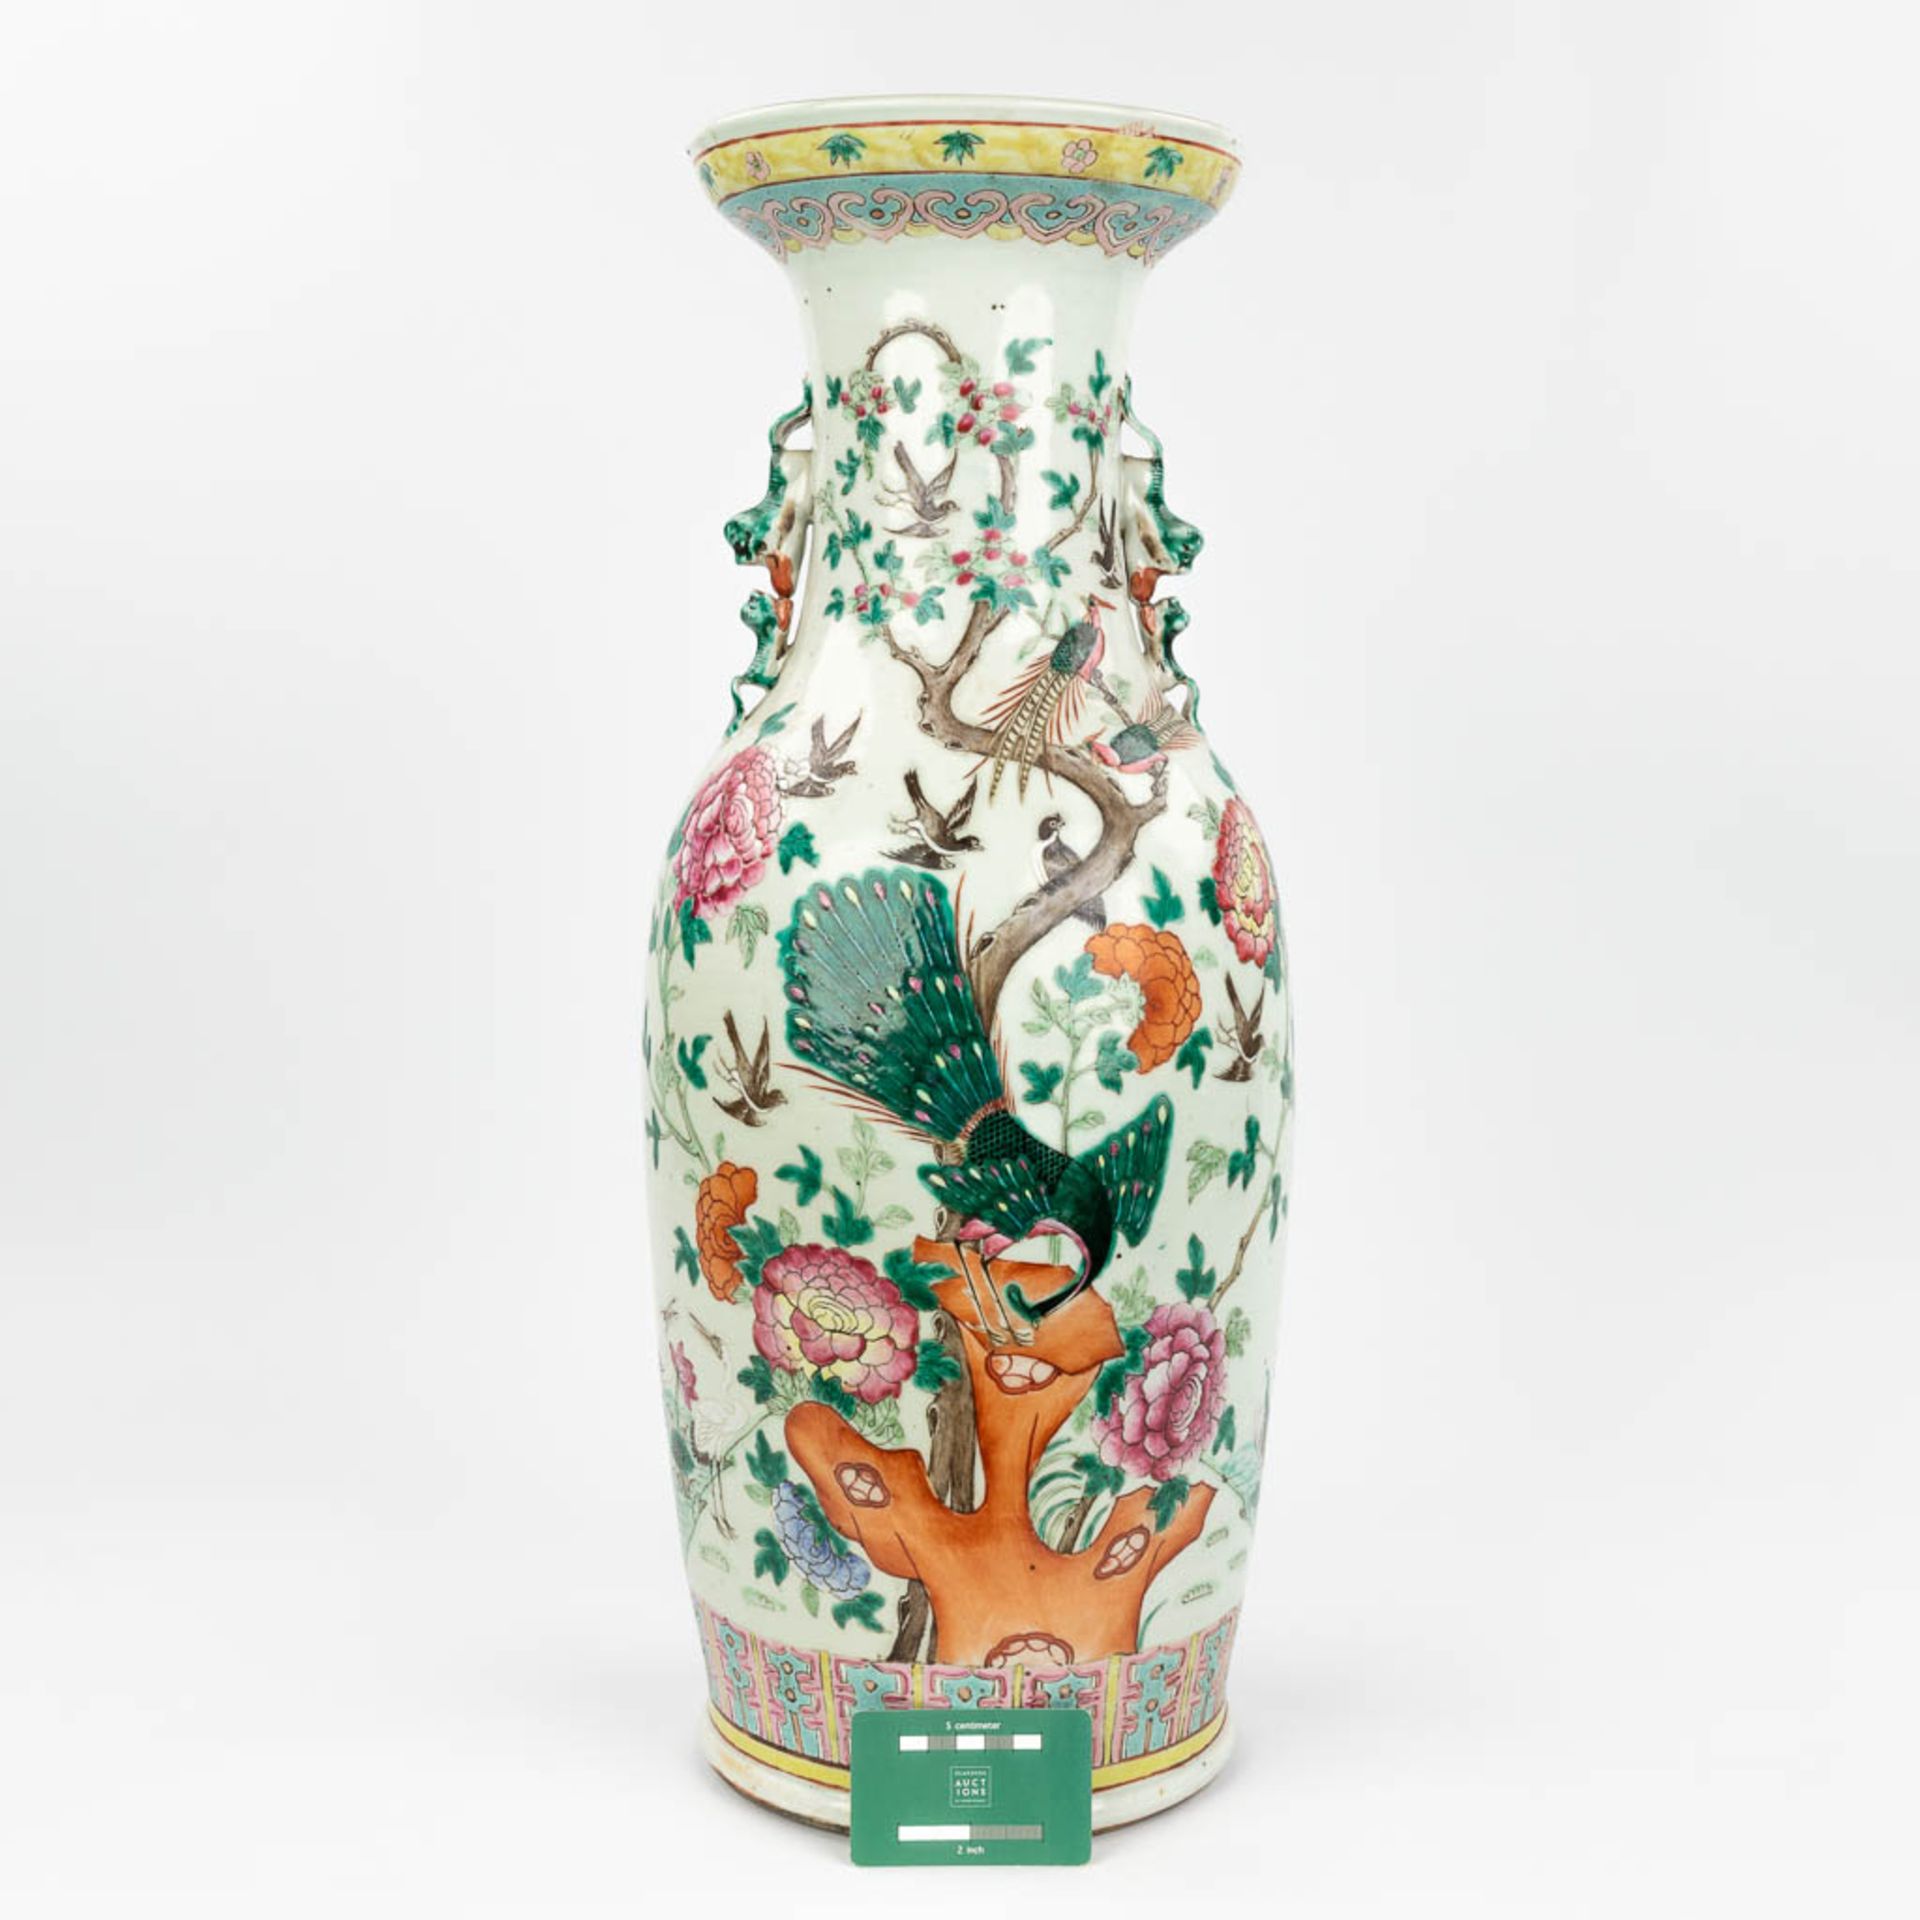 A Chinese vase made of porcelain, decorated with peacocks and birds. (61,5 x 24 cm) - Image 4 of 18